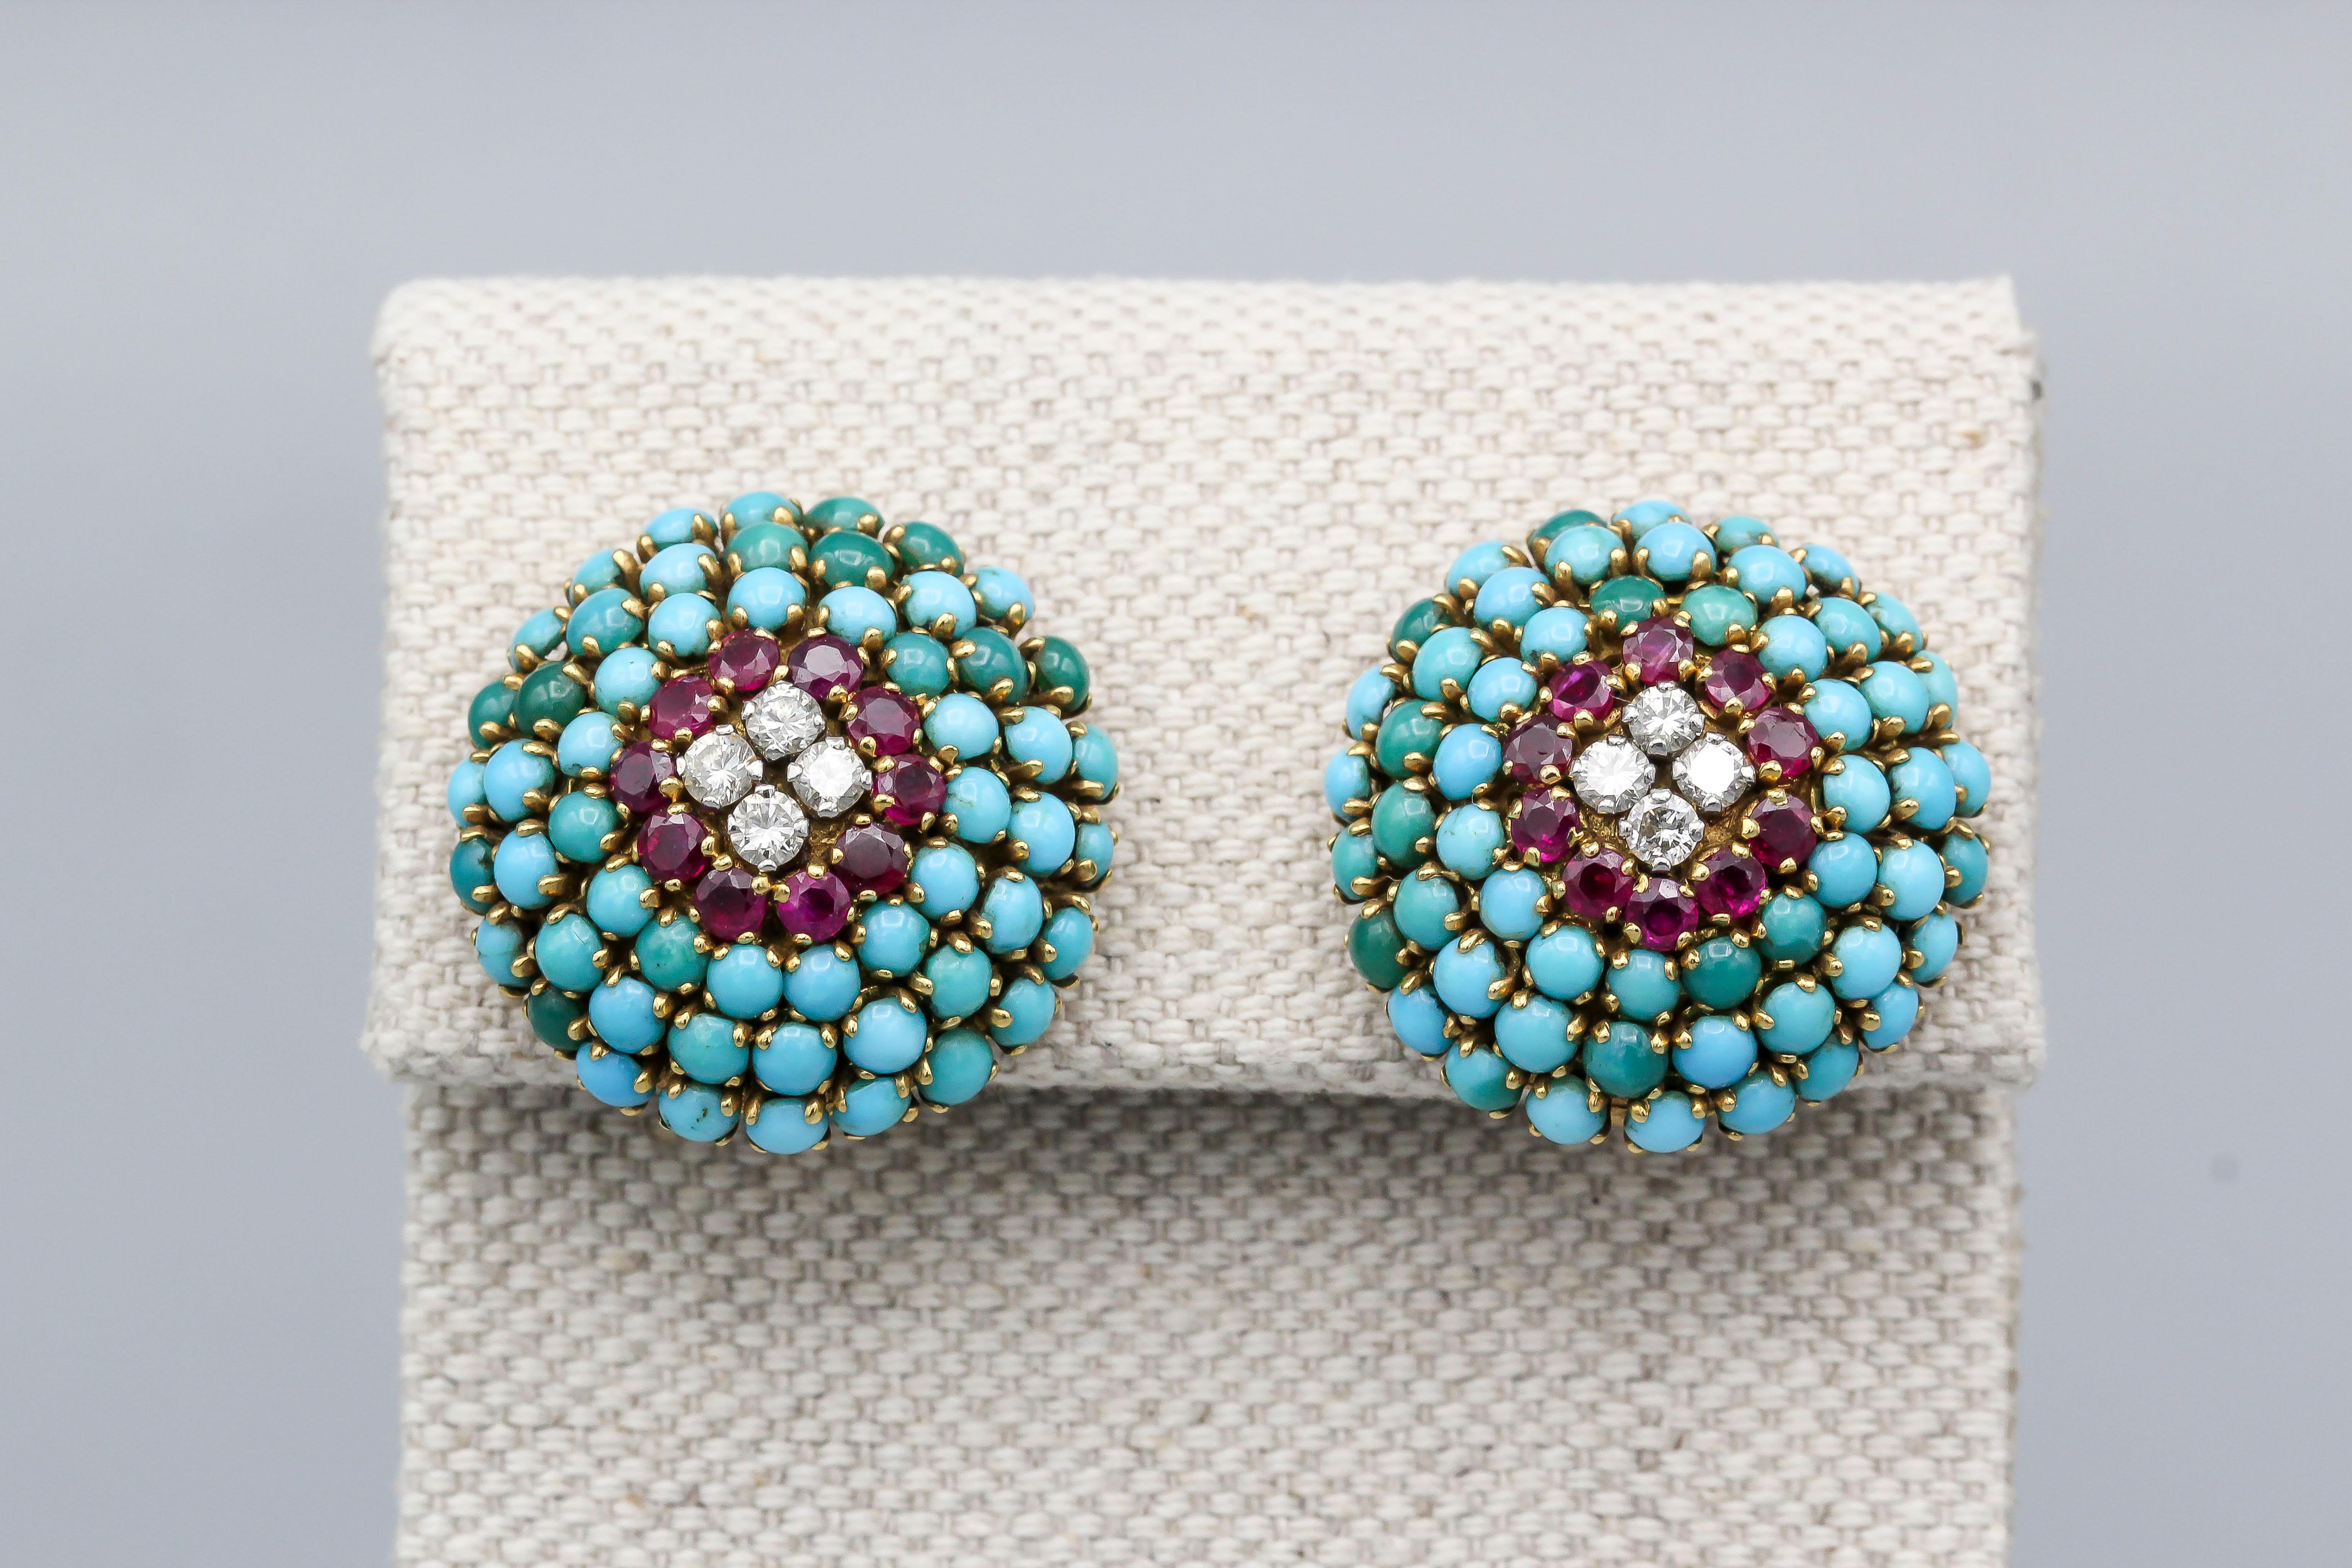 Fine pair of 18k gold earrings of French origin, circa 1950s.  They feature tree rows of Persian turquoise cabochons circling around one row of rich red faceted rubies, and centered with white brilliant cut diamonds.  

Hallmarks: French 18k gold